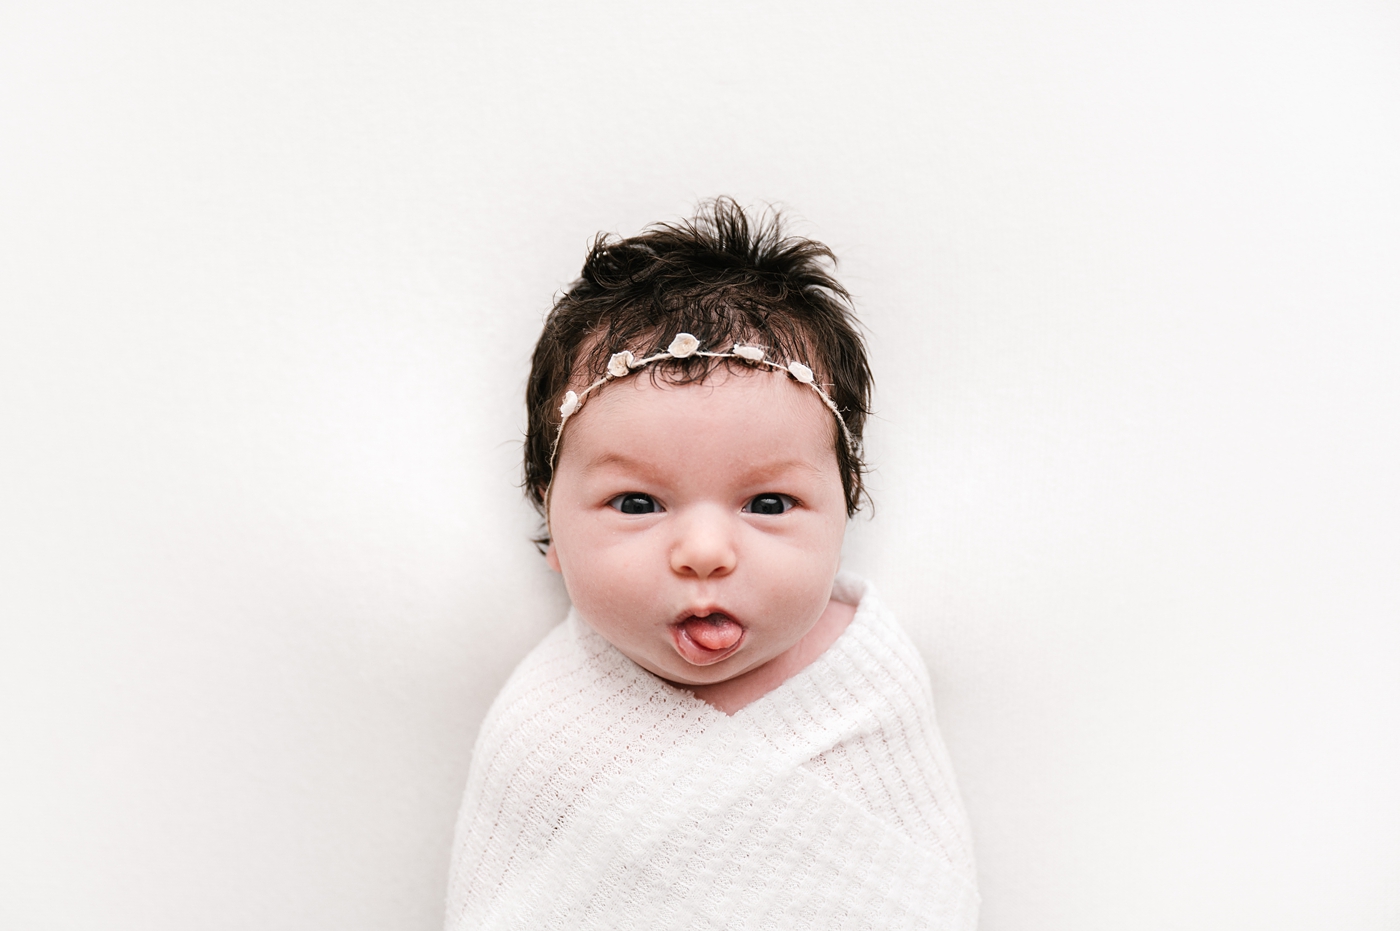 Baby girl sticks her tongue out during studio newborn session. Image by Meg Newton Photography.